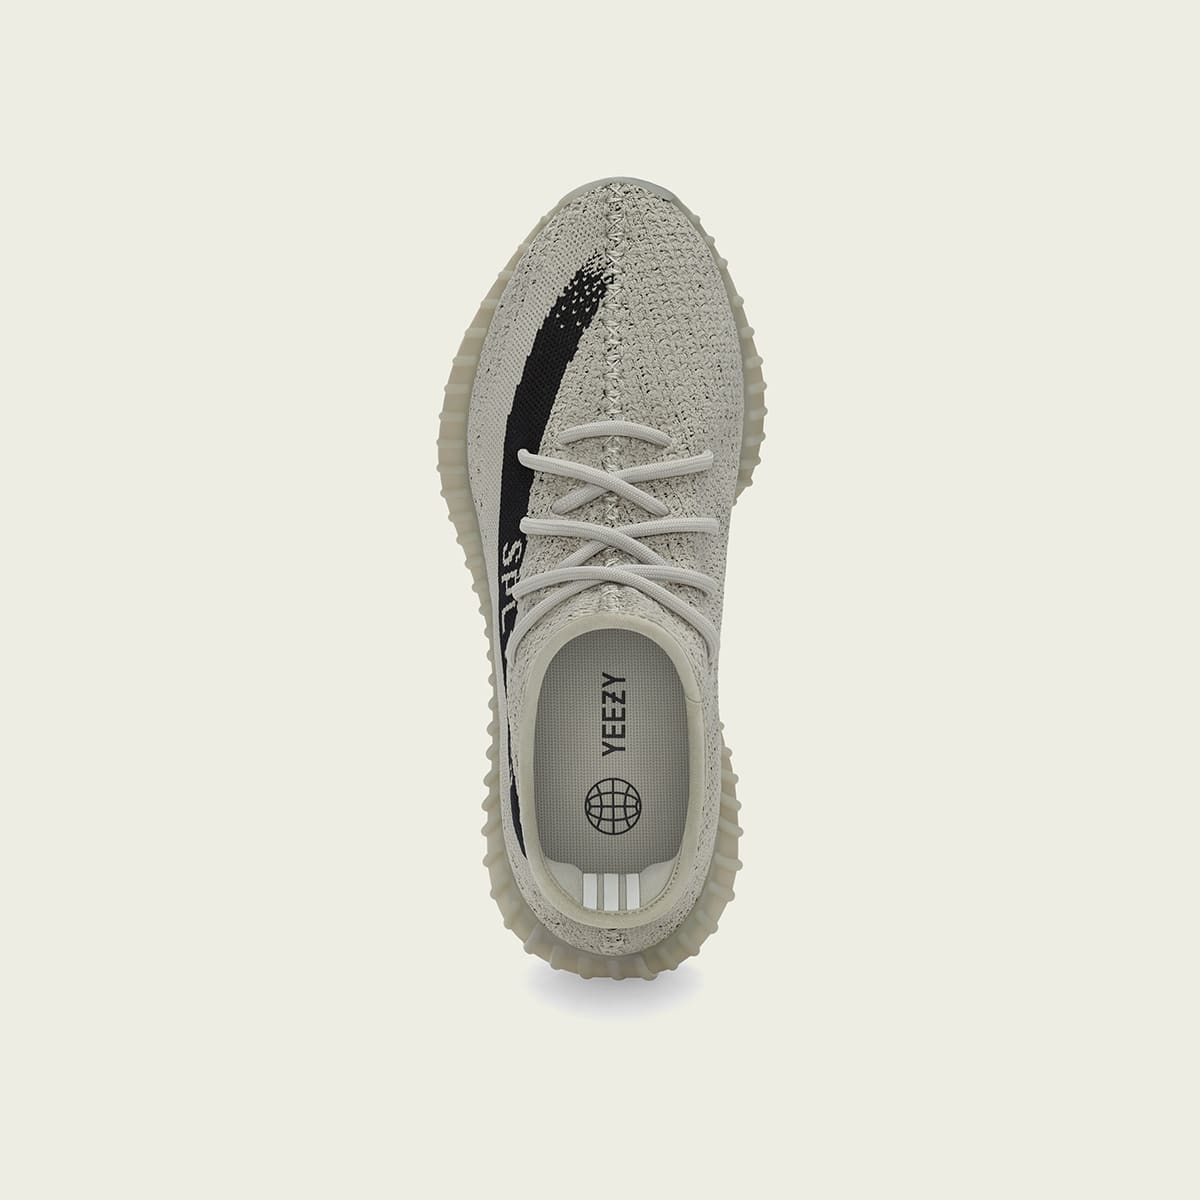 Yeezy Boost 350 V2 (Slate) | END. Launches